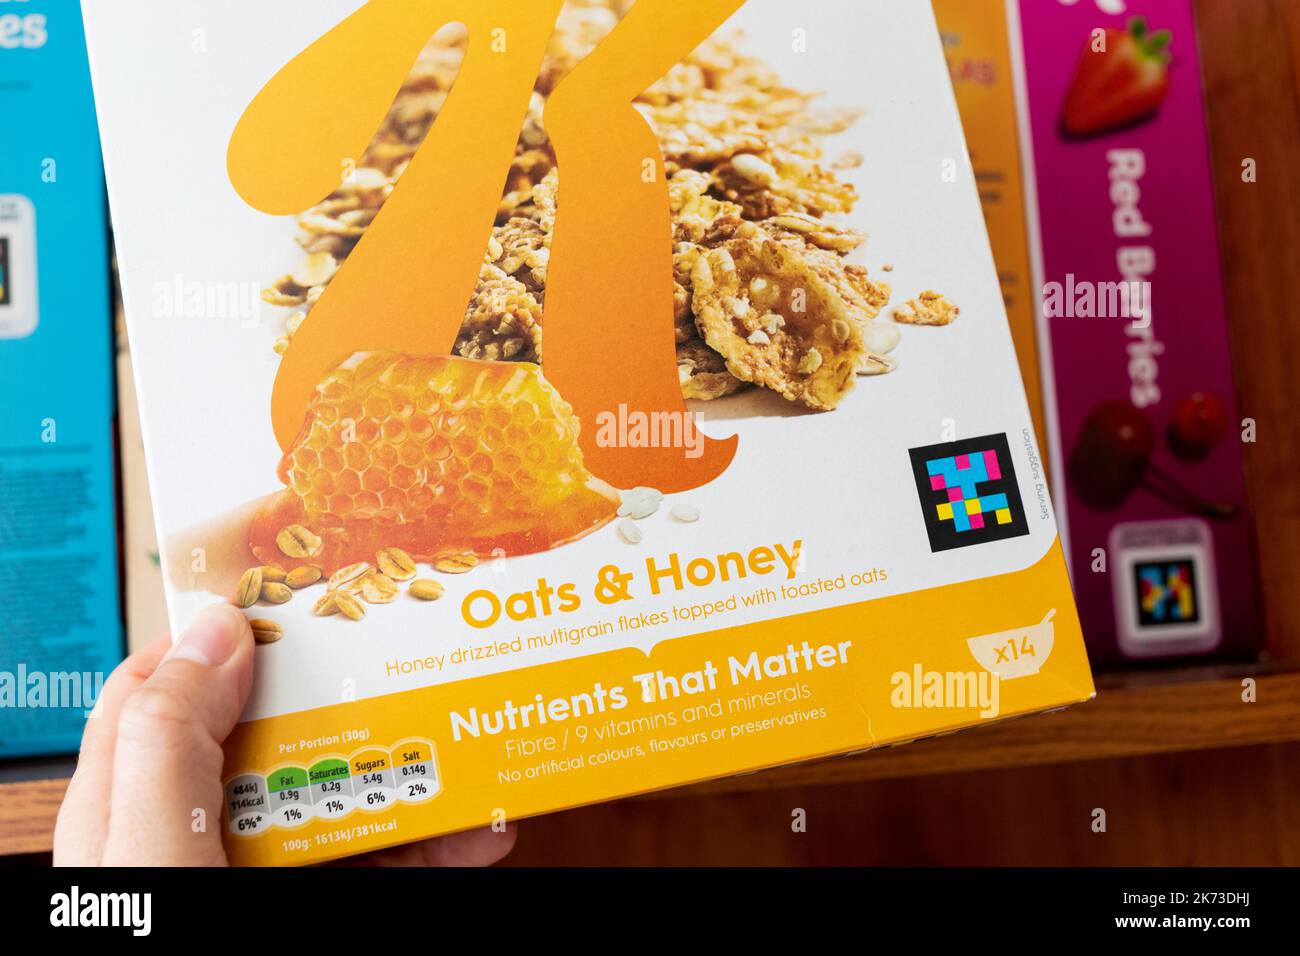 Box of Kelloggs Special K Oats and Honey cereal Stock Photo